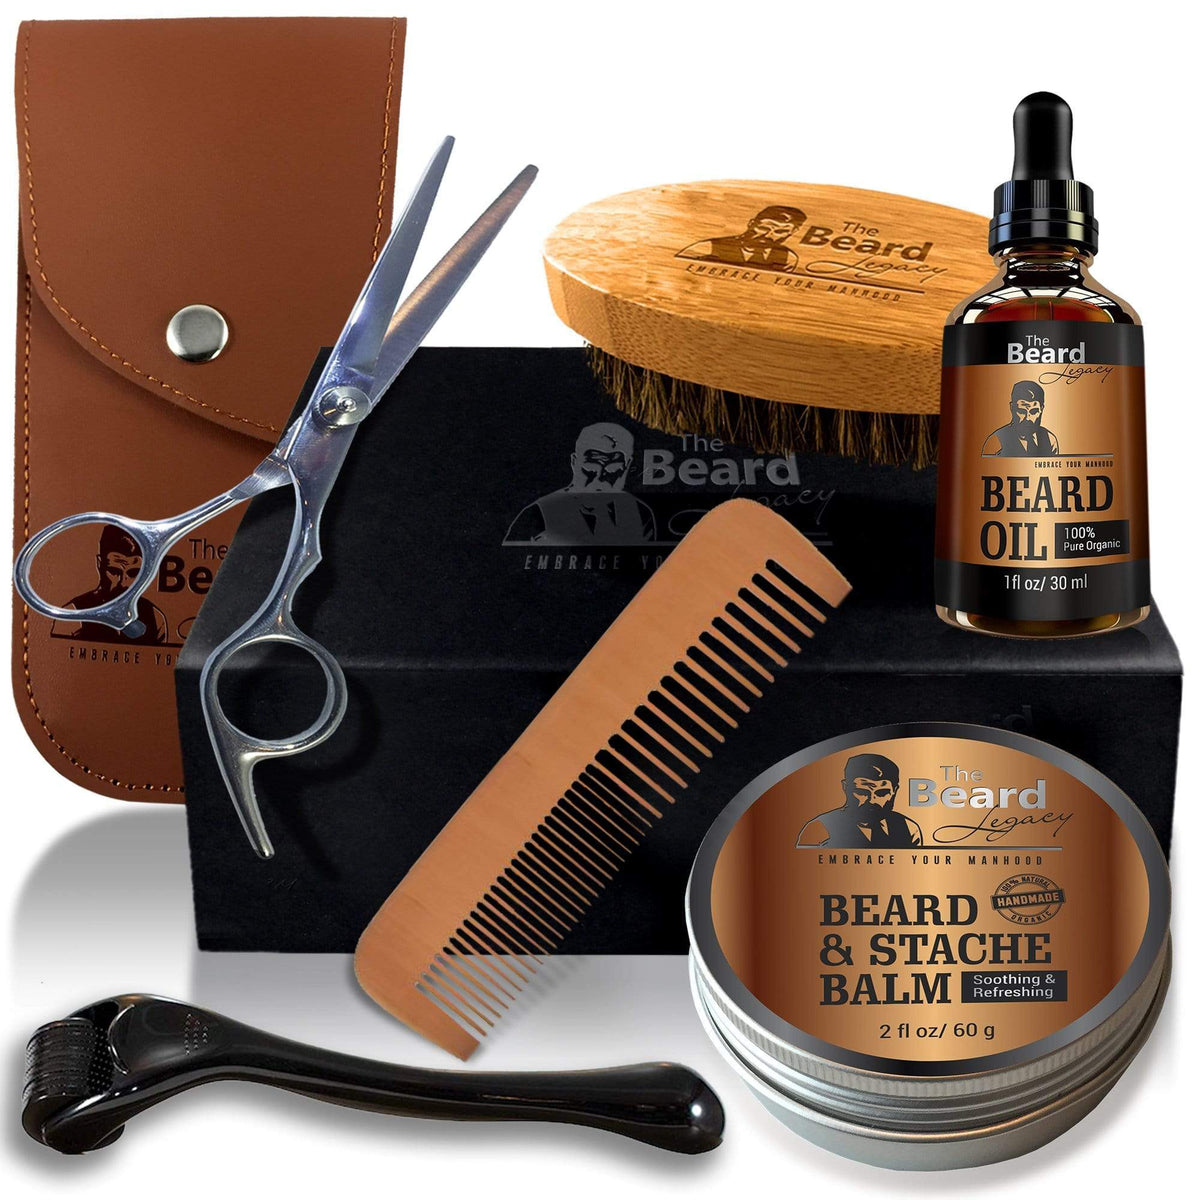 The Beard Legacy A Complete Beard Grooming Kit For Men 0795